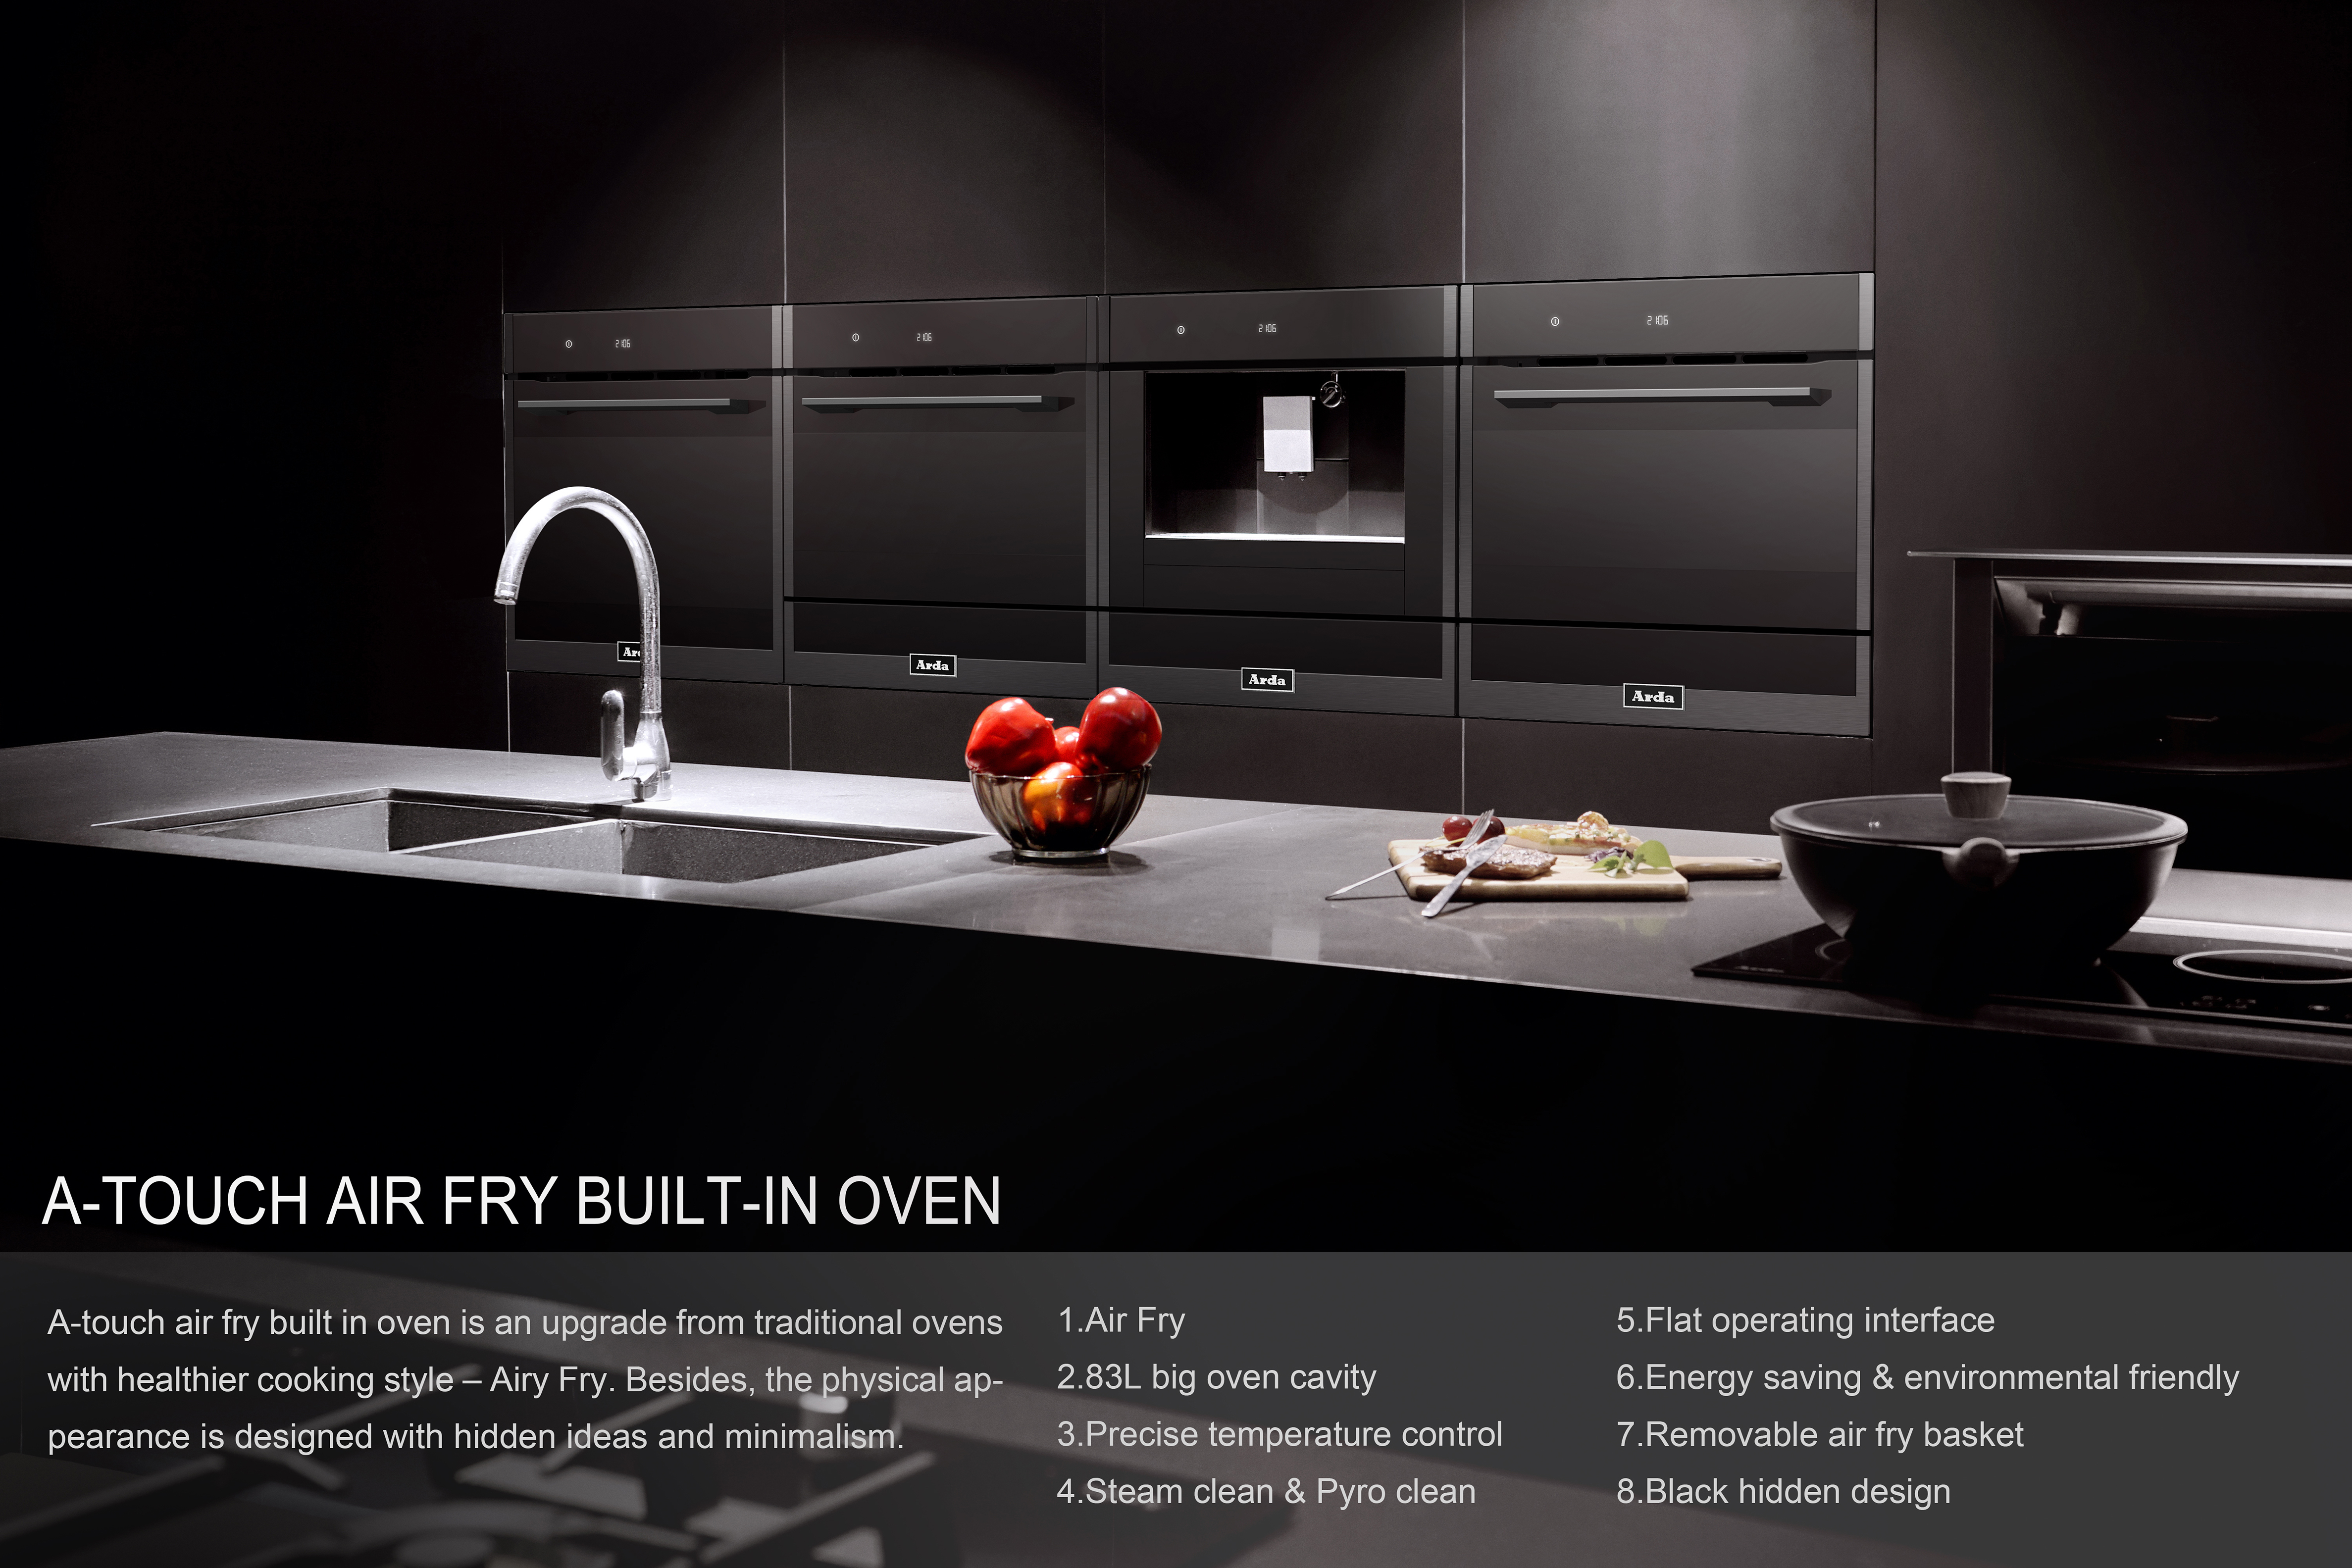 A-Touch Air Fry Built-in Oven